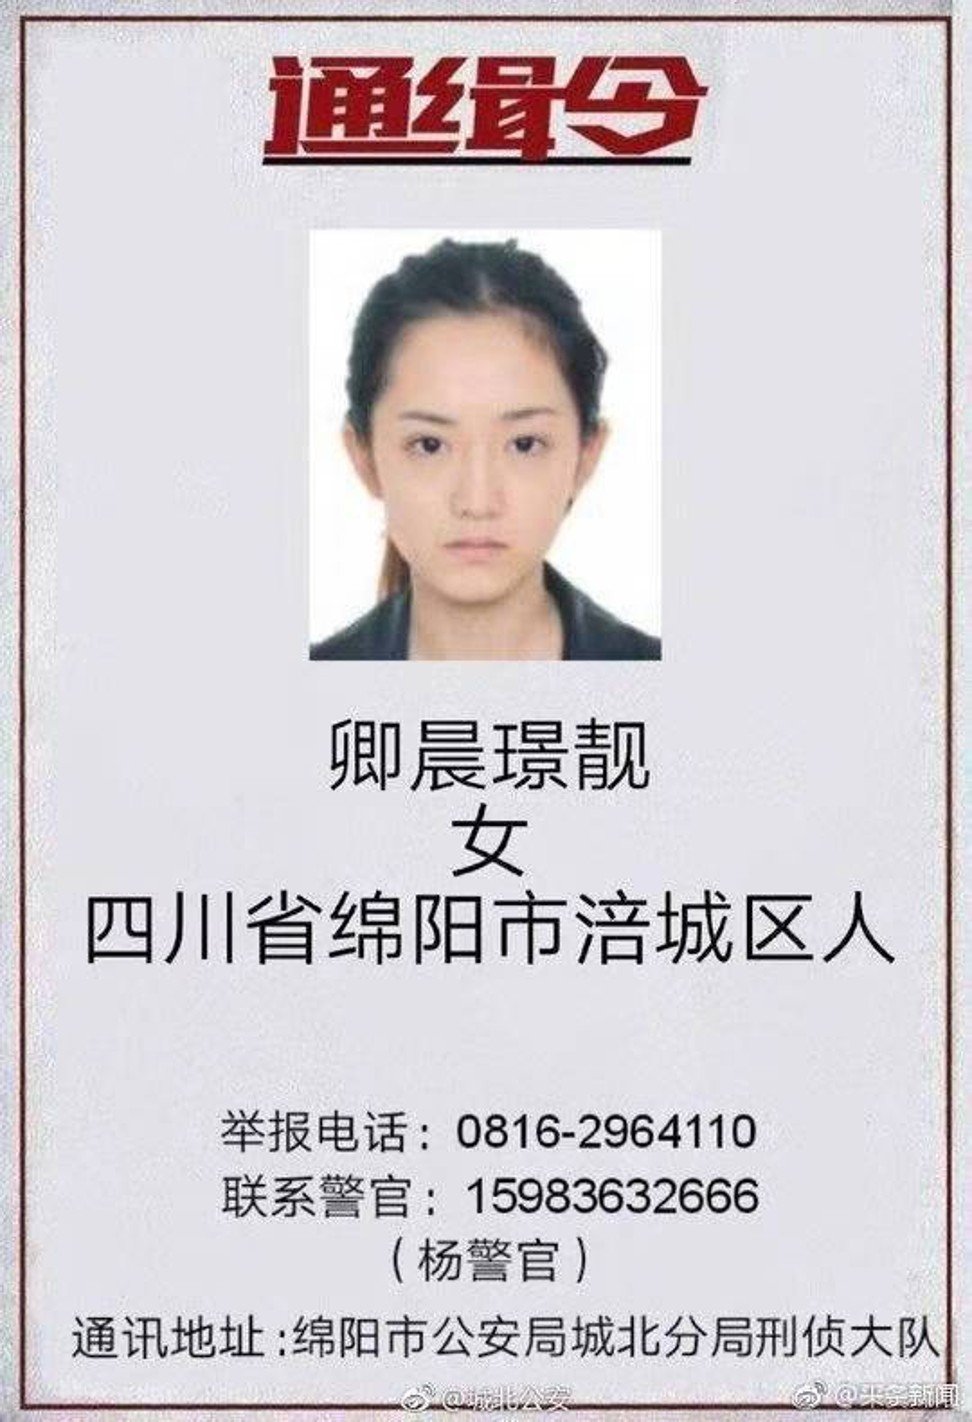 Qingchen Jingjing’s mugshot went viral after a warrant was issued for her arrest. Photo: Weibo